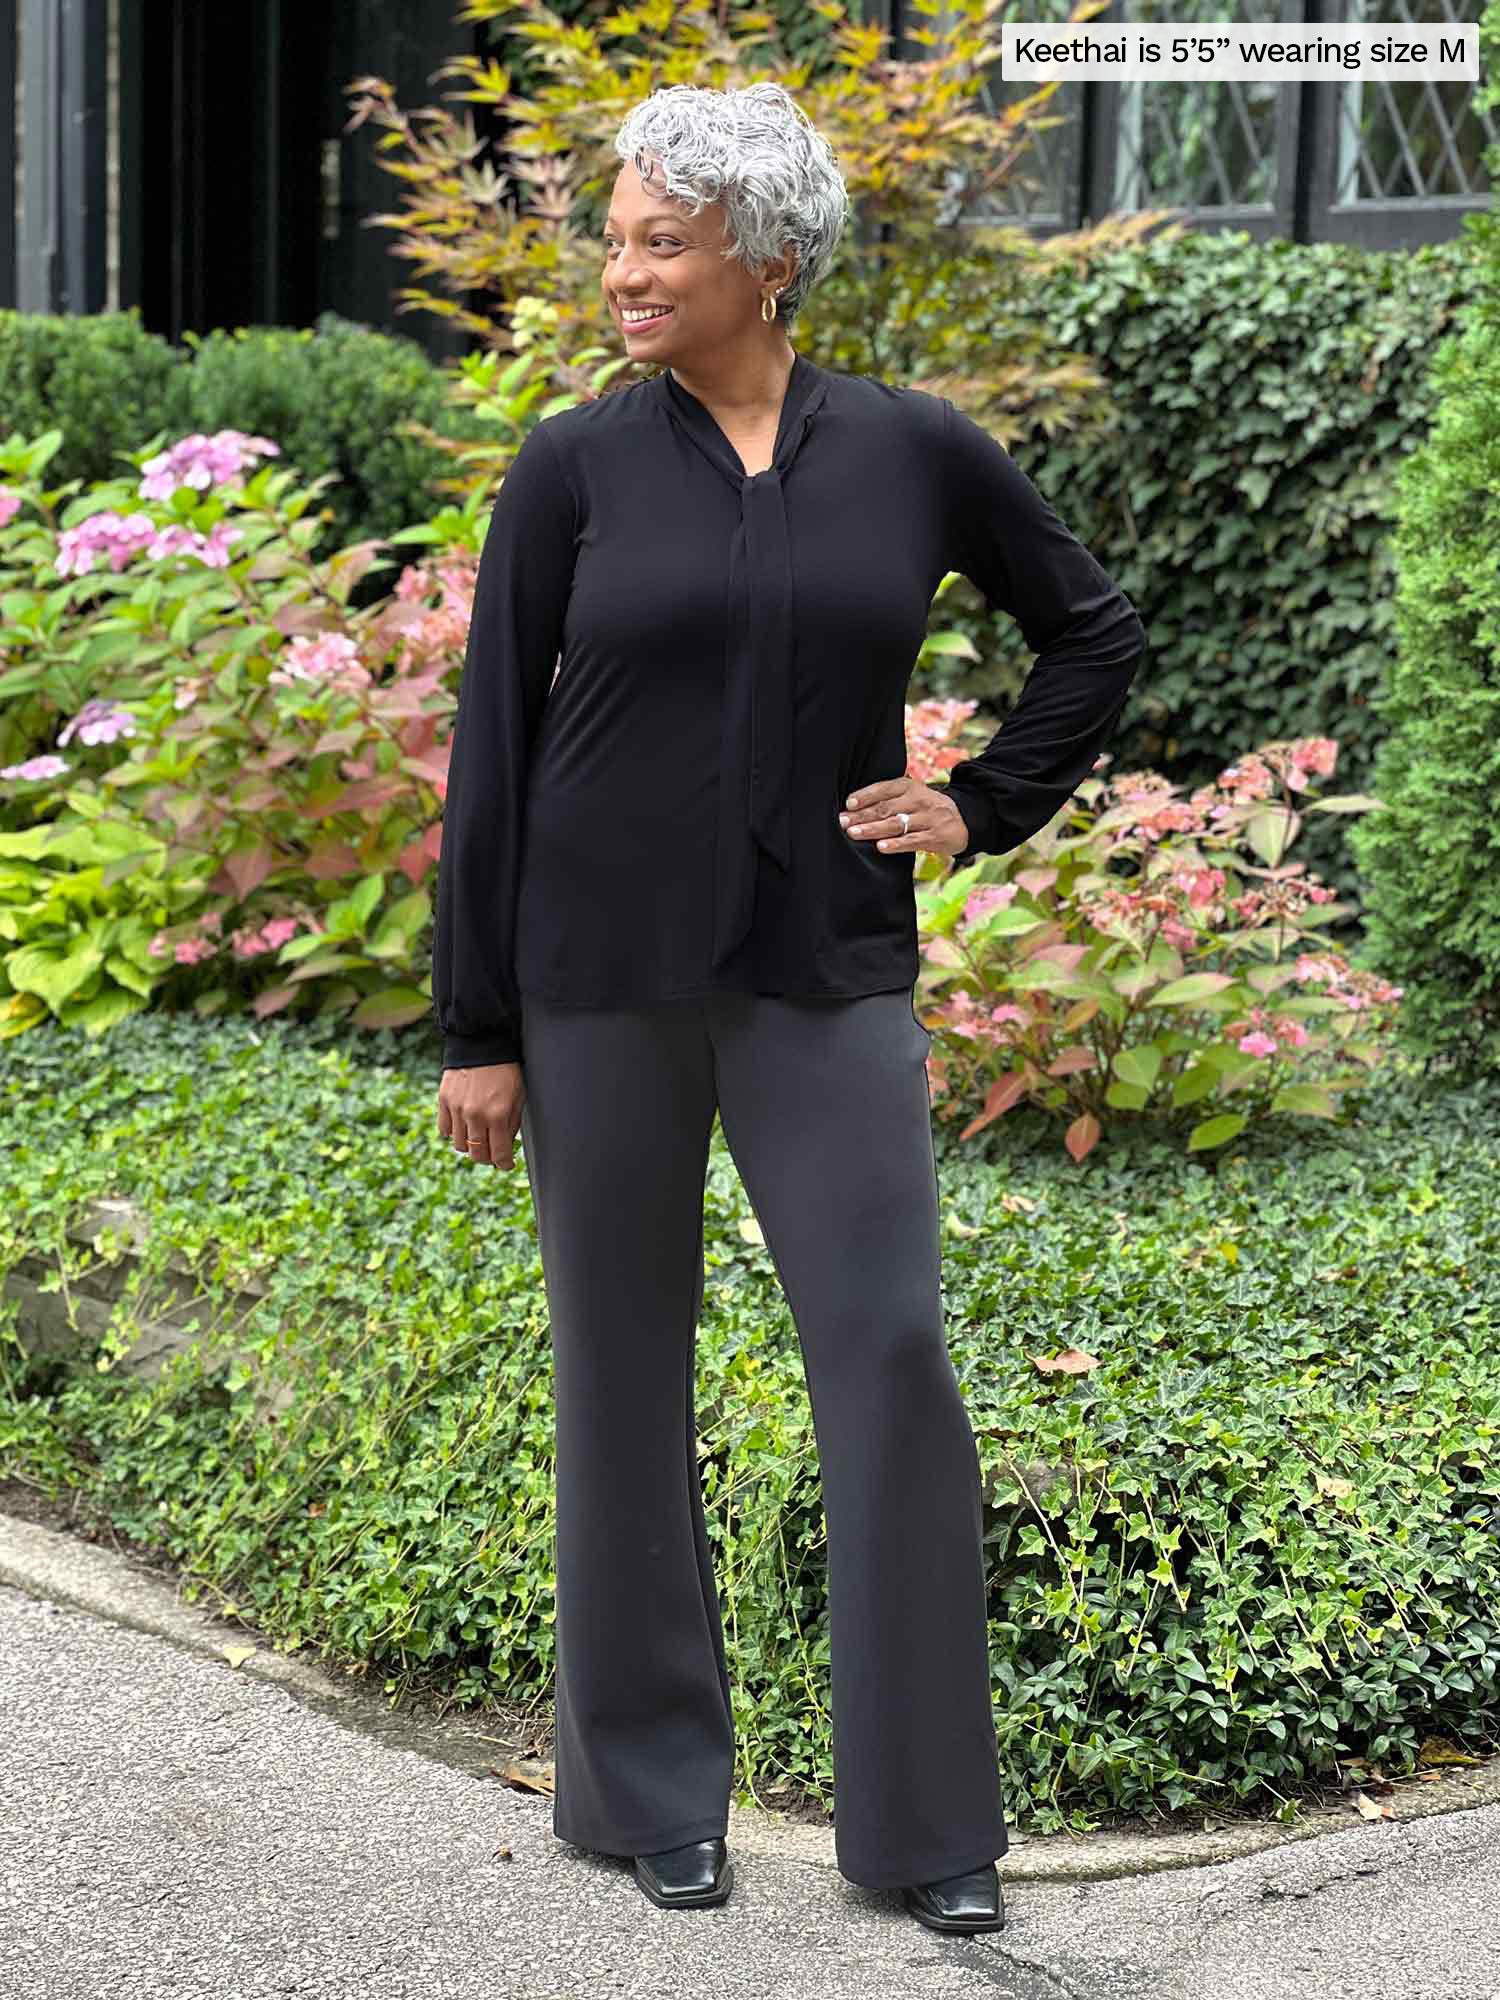 Laney mid-rise flare pant, Sustainable women's clothing made in Canada